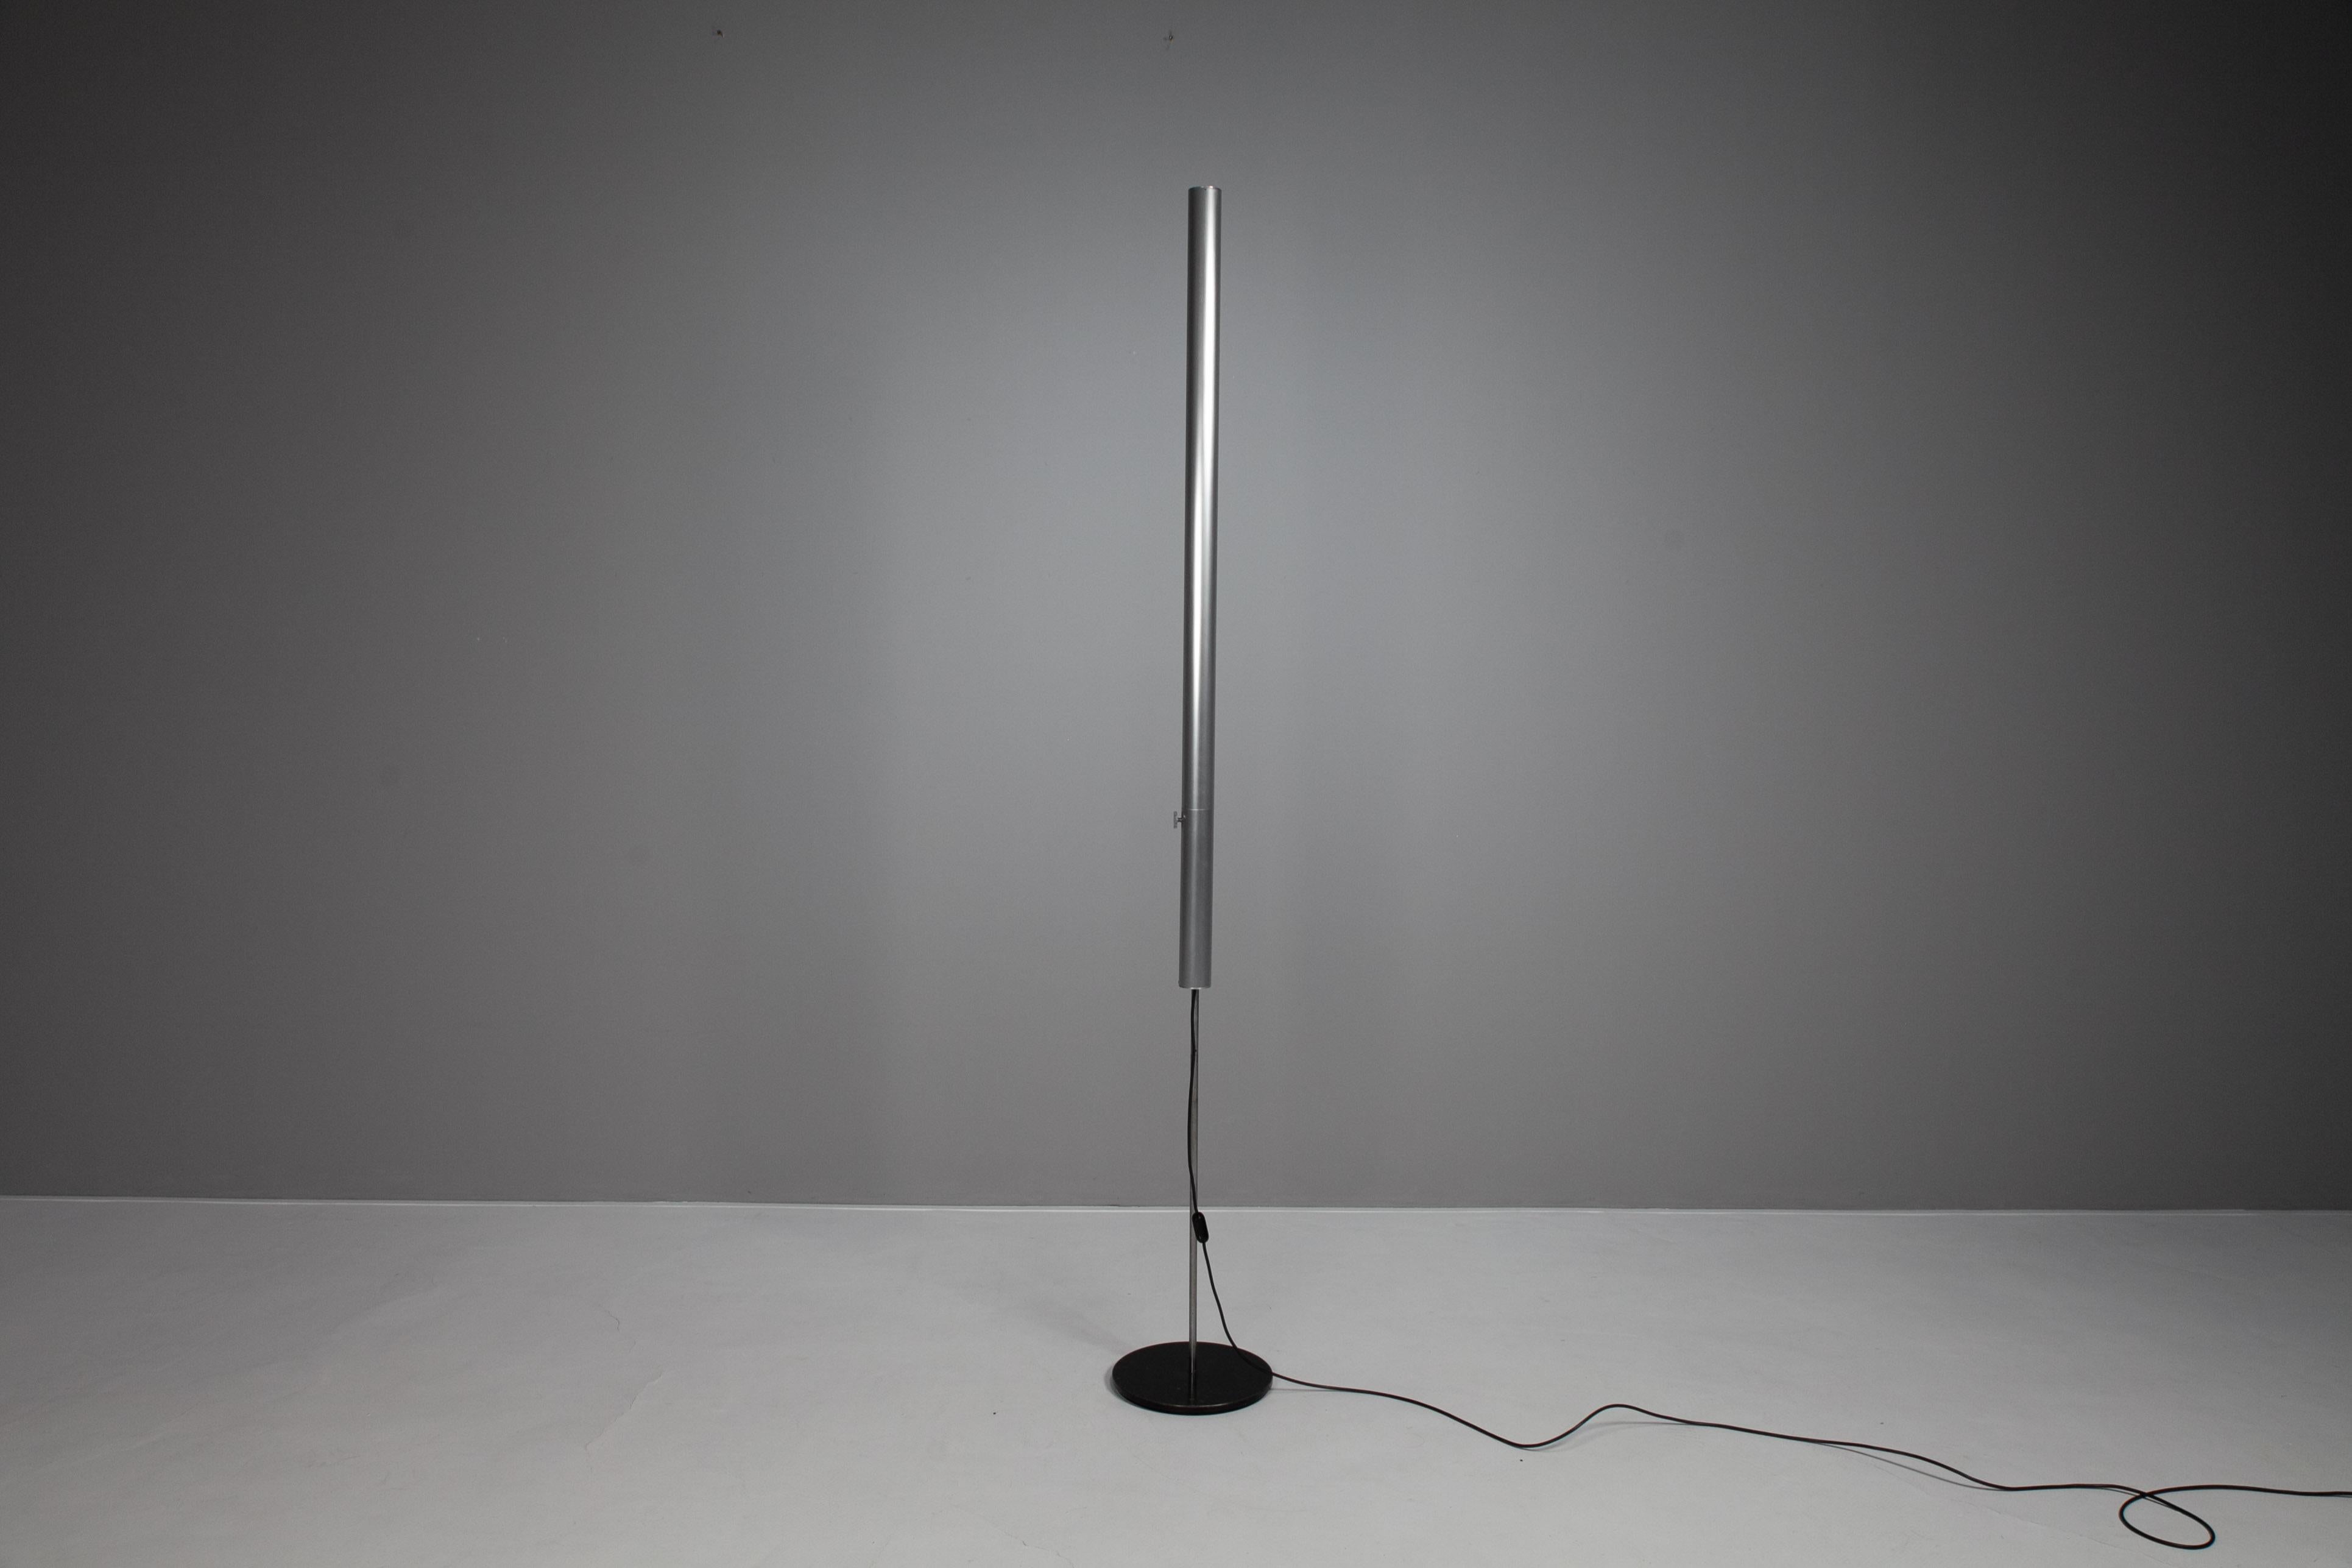 The floor lamp consists of a black painted round steel plate with support rod made of chrome-plated steel tube. Lighting rod made of matt anodized aluminum tube with fluorescent lamp. Joint plexi crystal clear.

The support rod can be unscrewed from